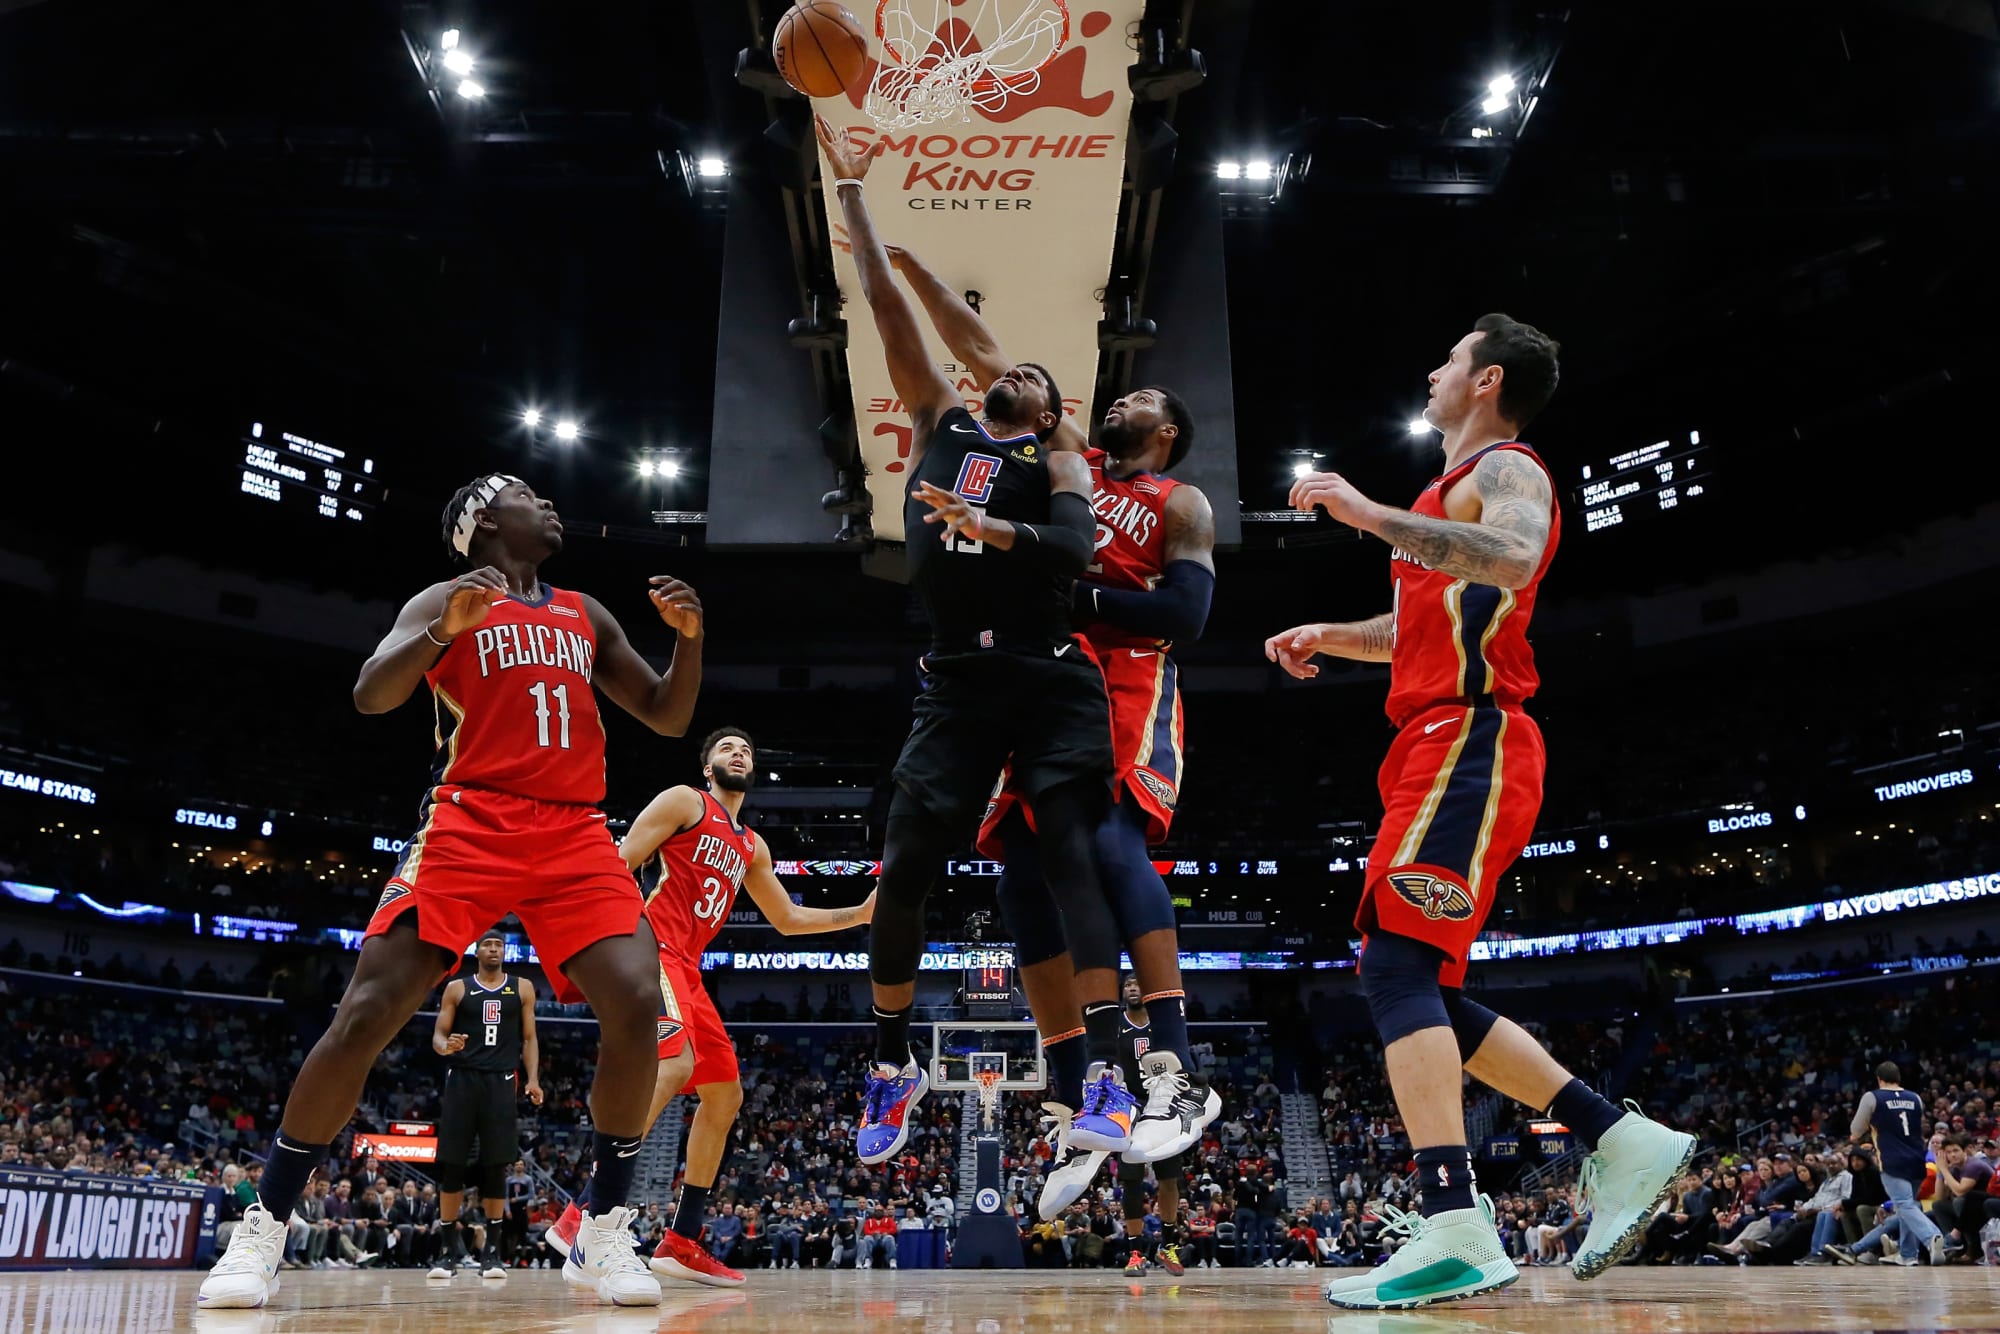 New Orleans Pelicans vs Clippers Preview The Future vs. The Present